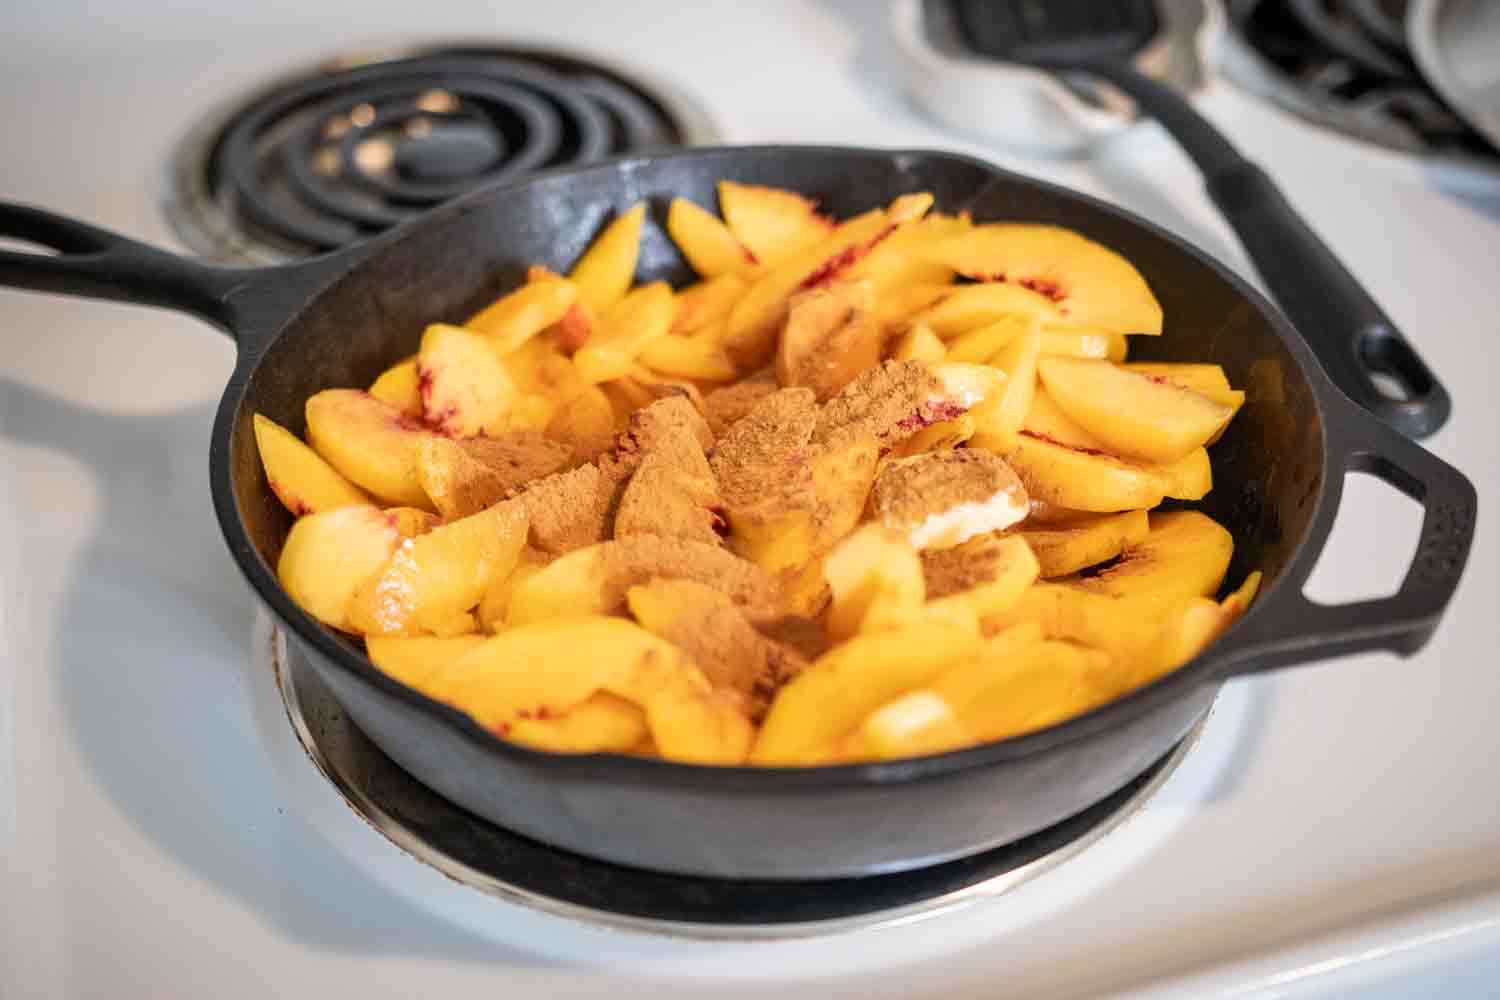 cast iron skillet of peaches cooking down with butter, maple syrup and cinnamon